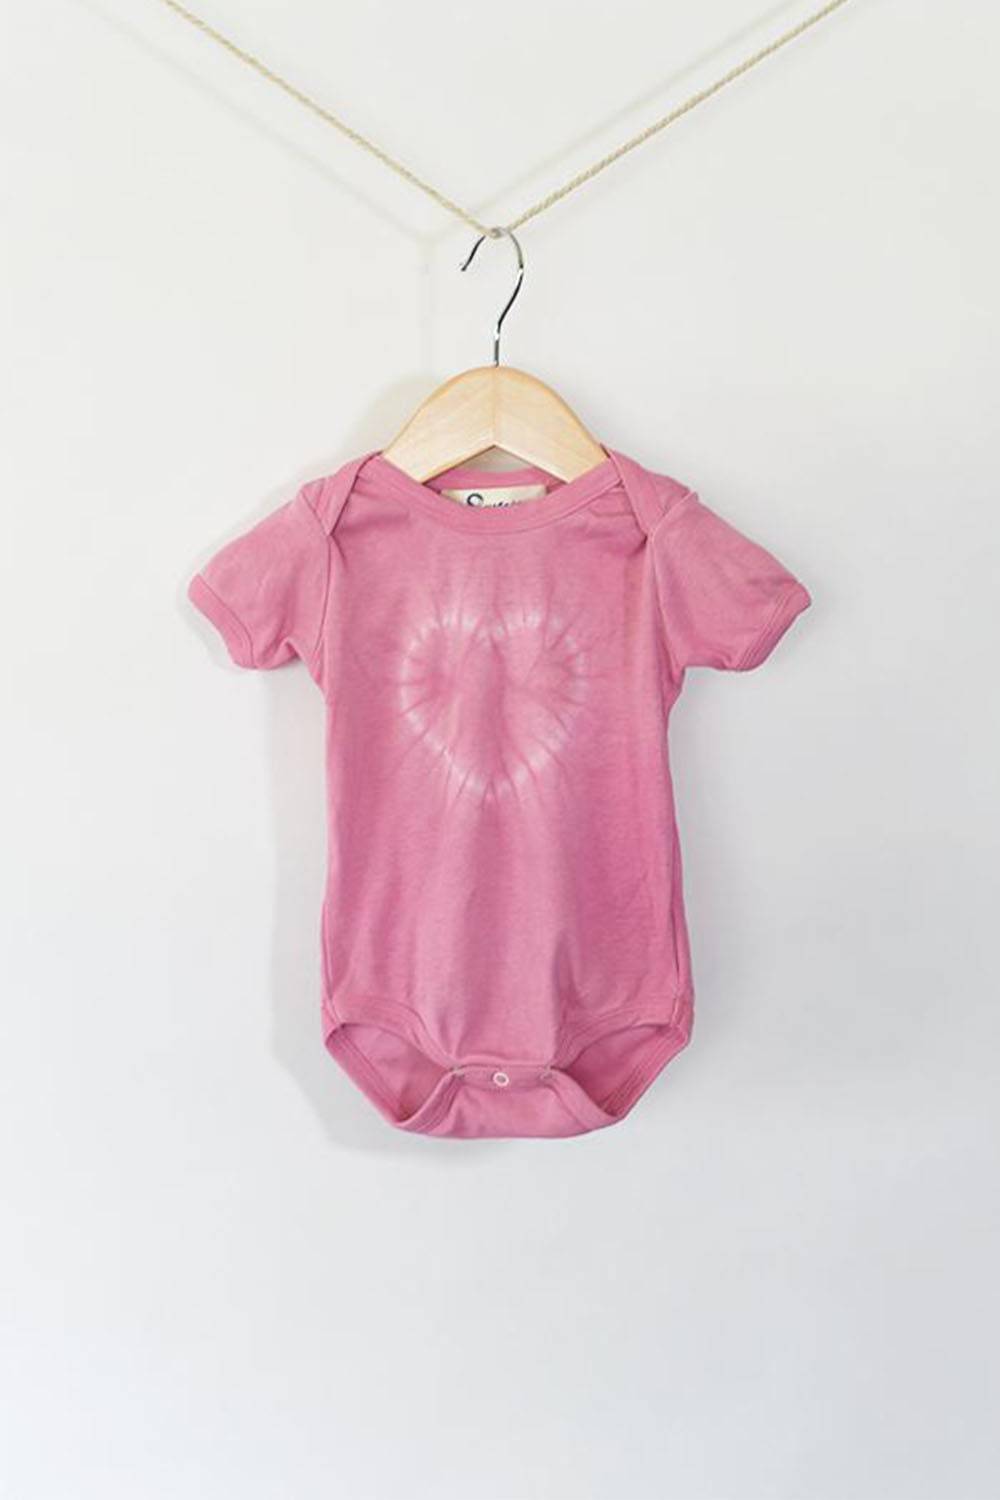 sustain organic baby clothes not made in china